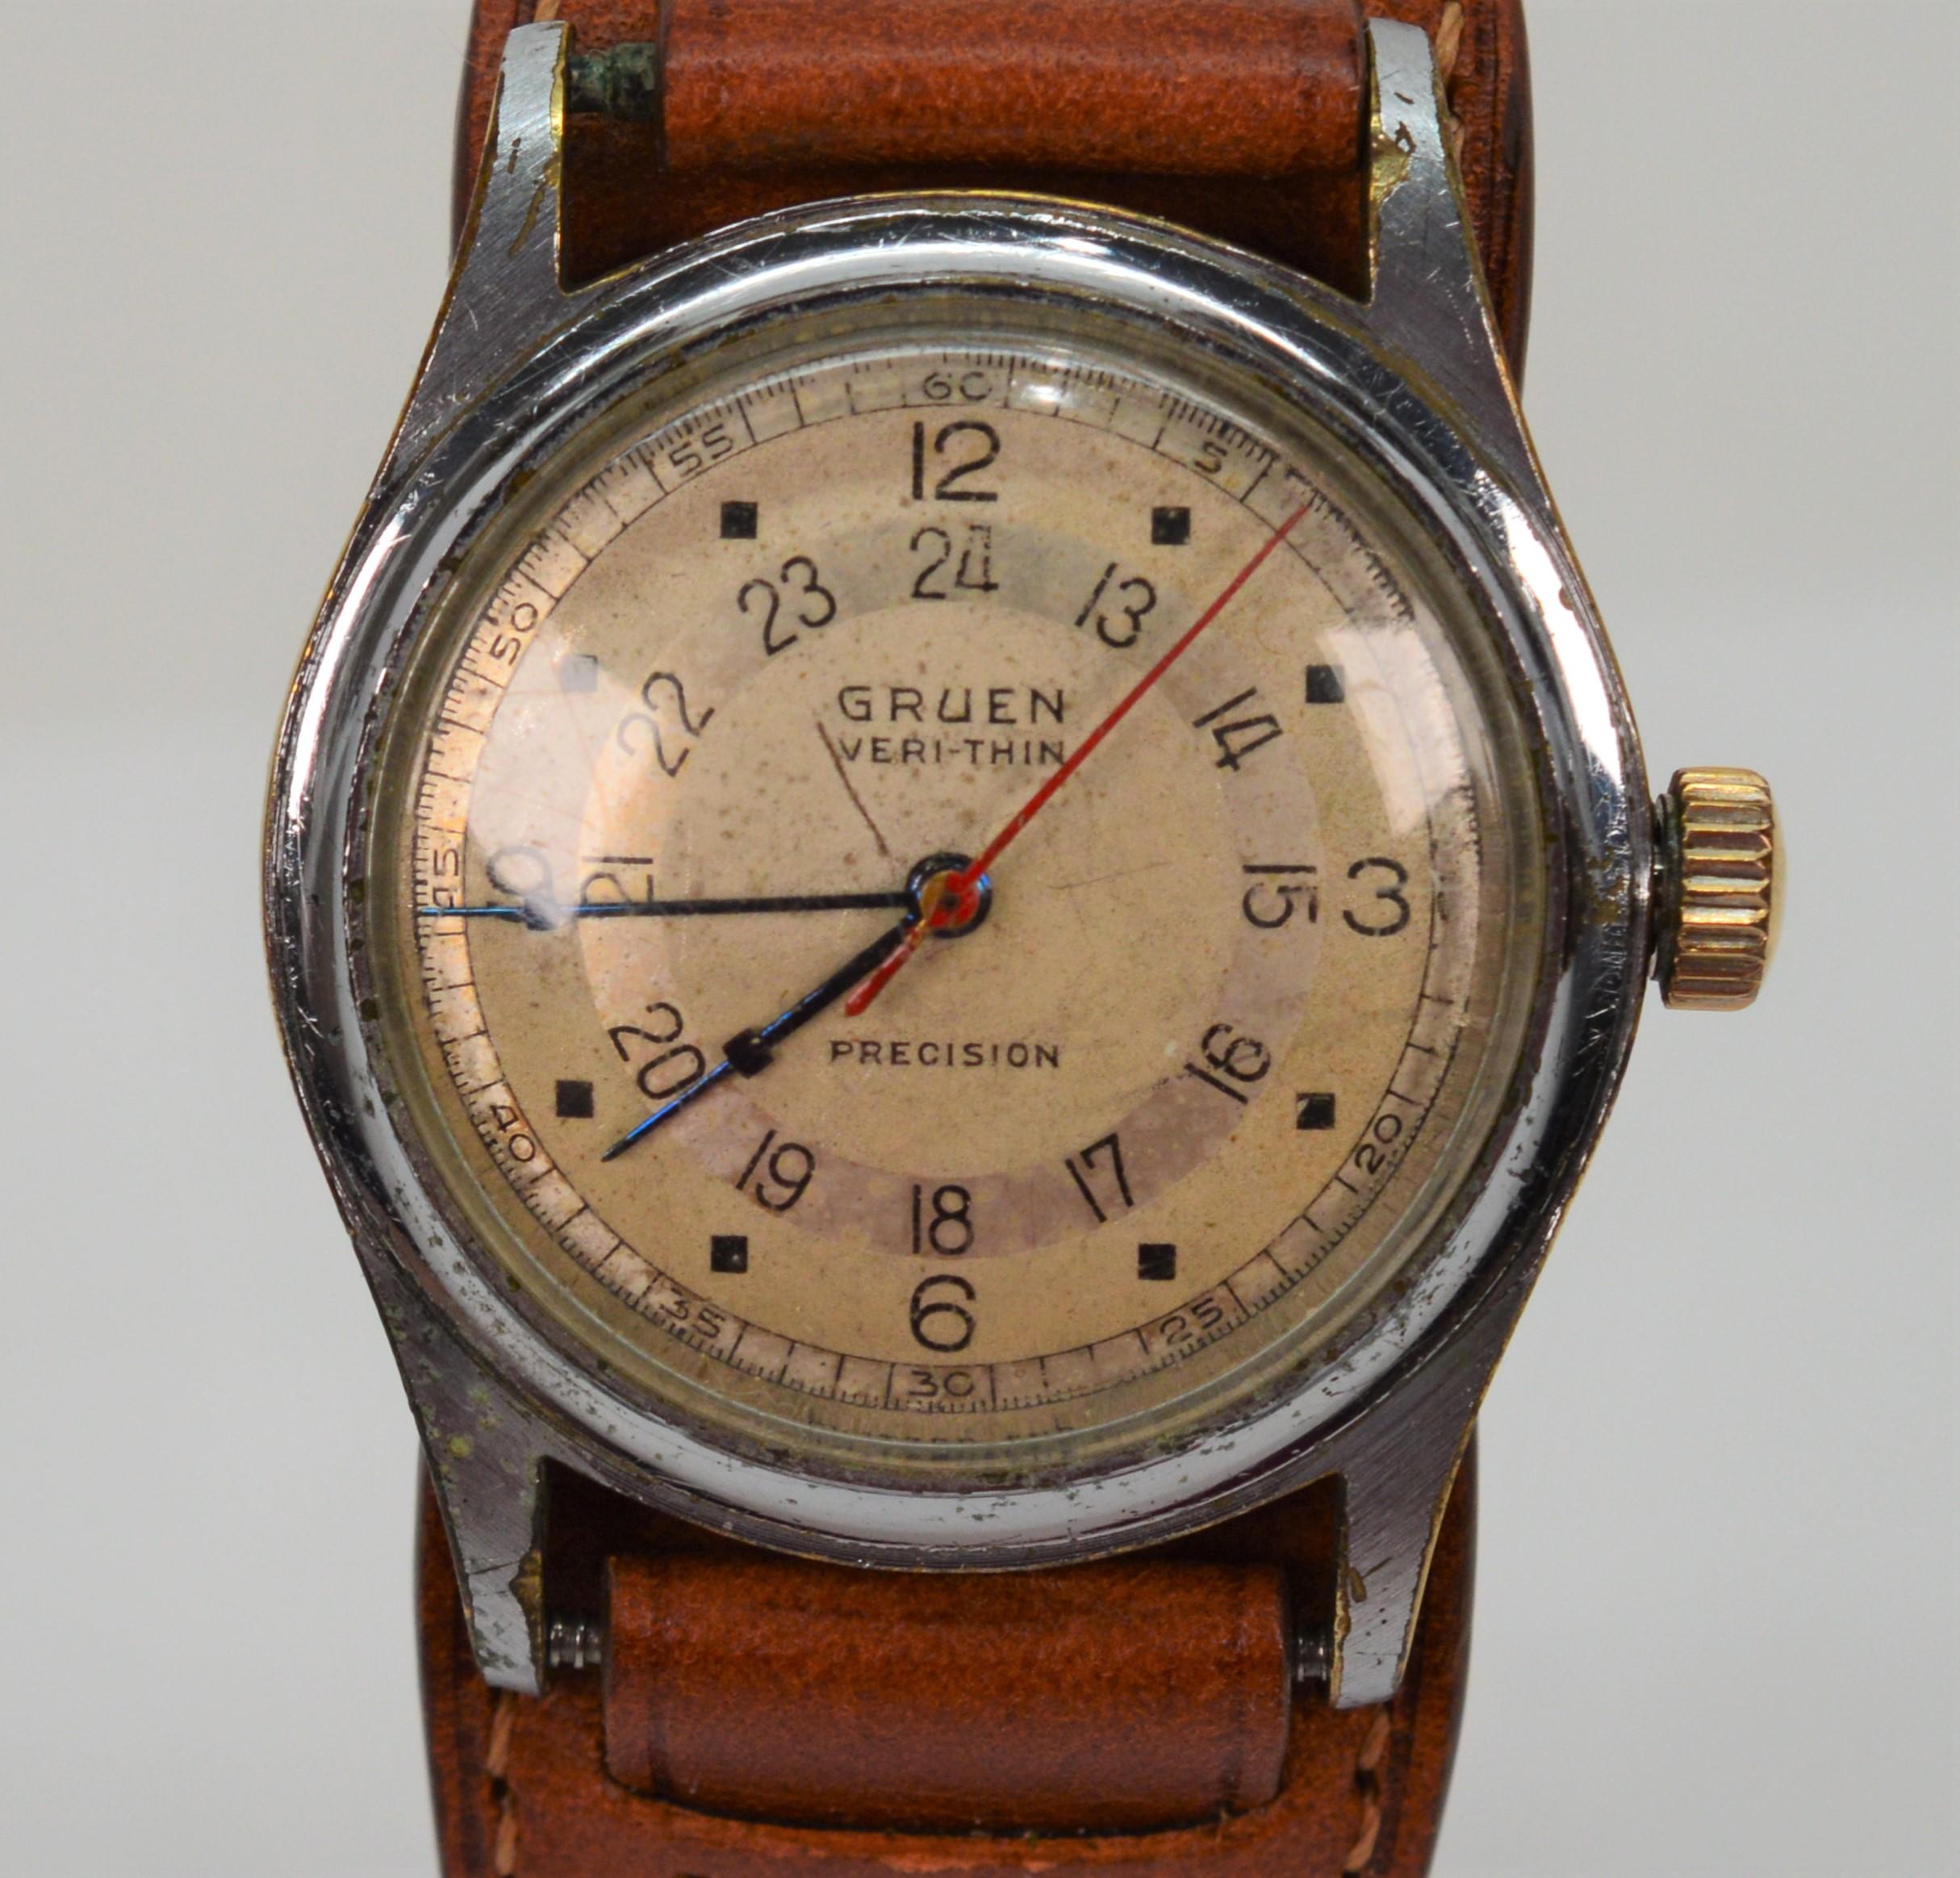 Gruen 420SS Veri Thin Pan American Wrist Watch  In Fair Condition For Sale In Mount Kisco, NY